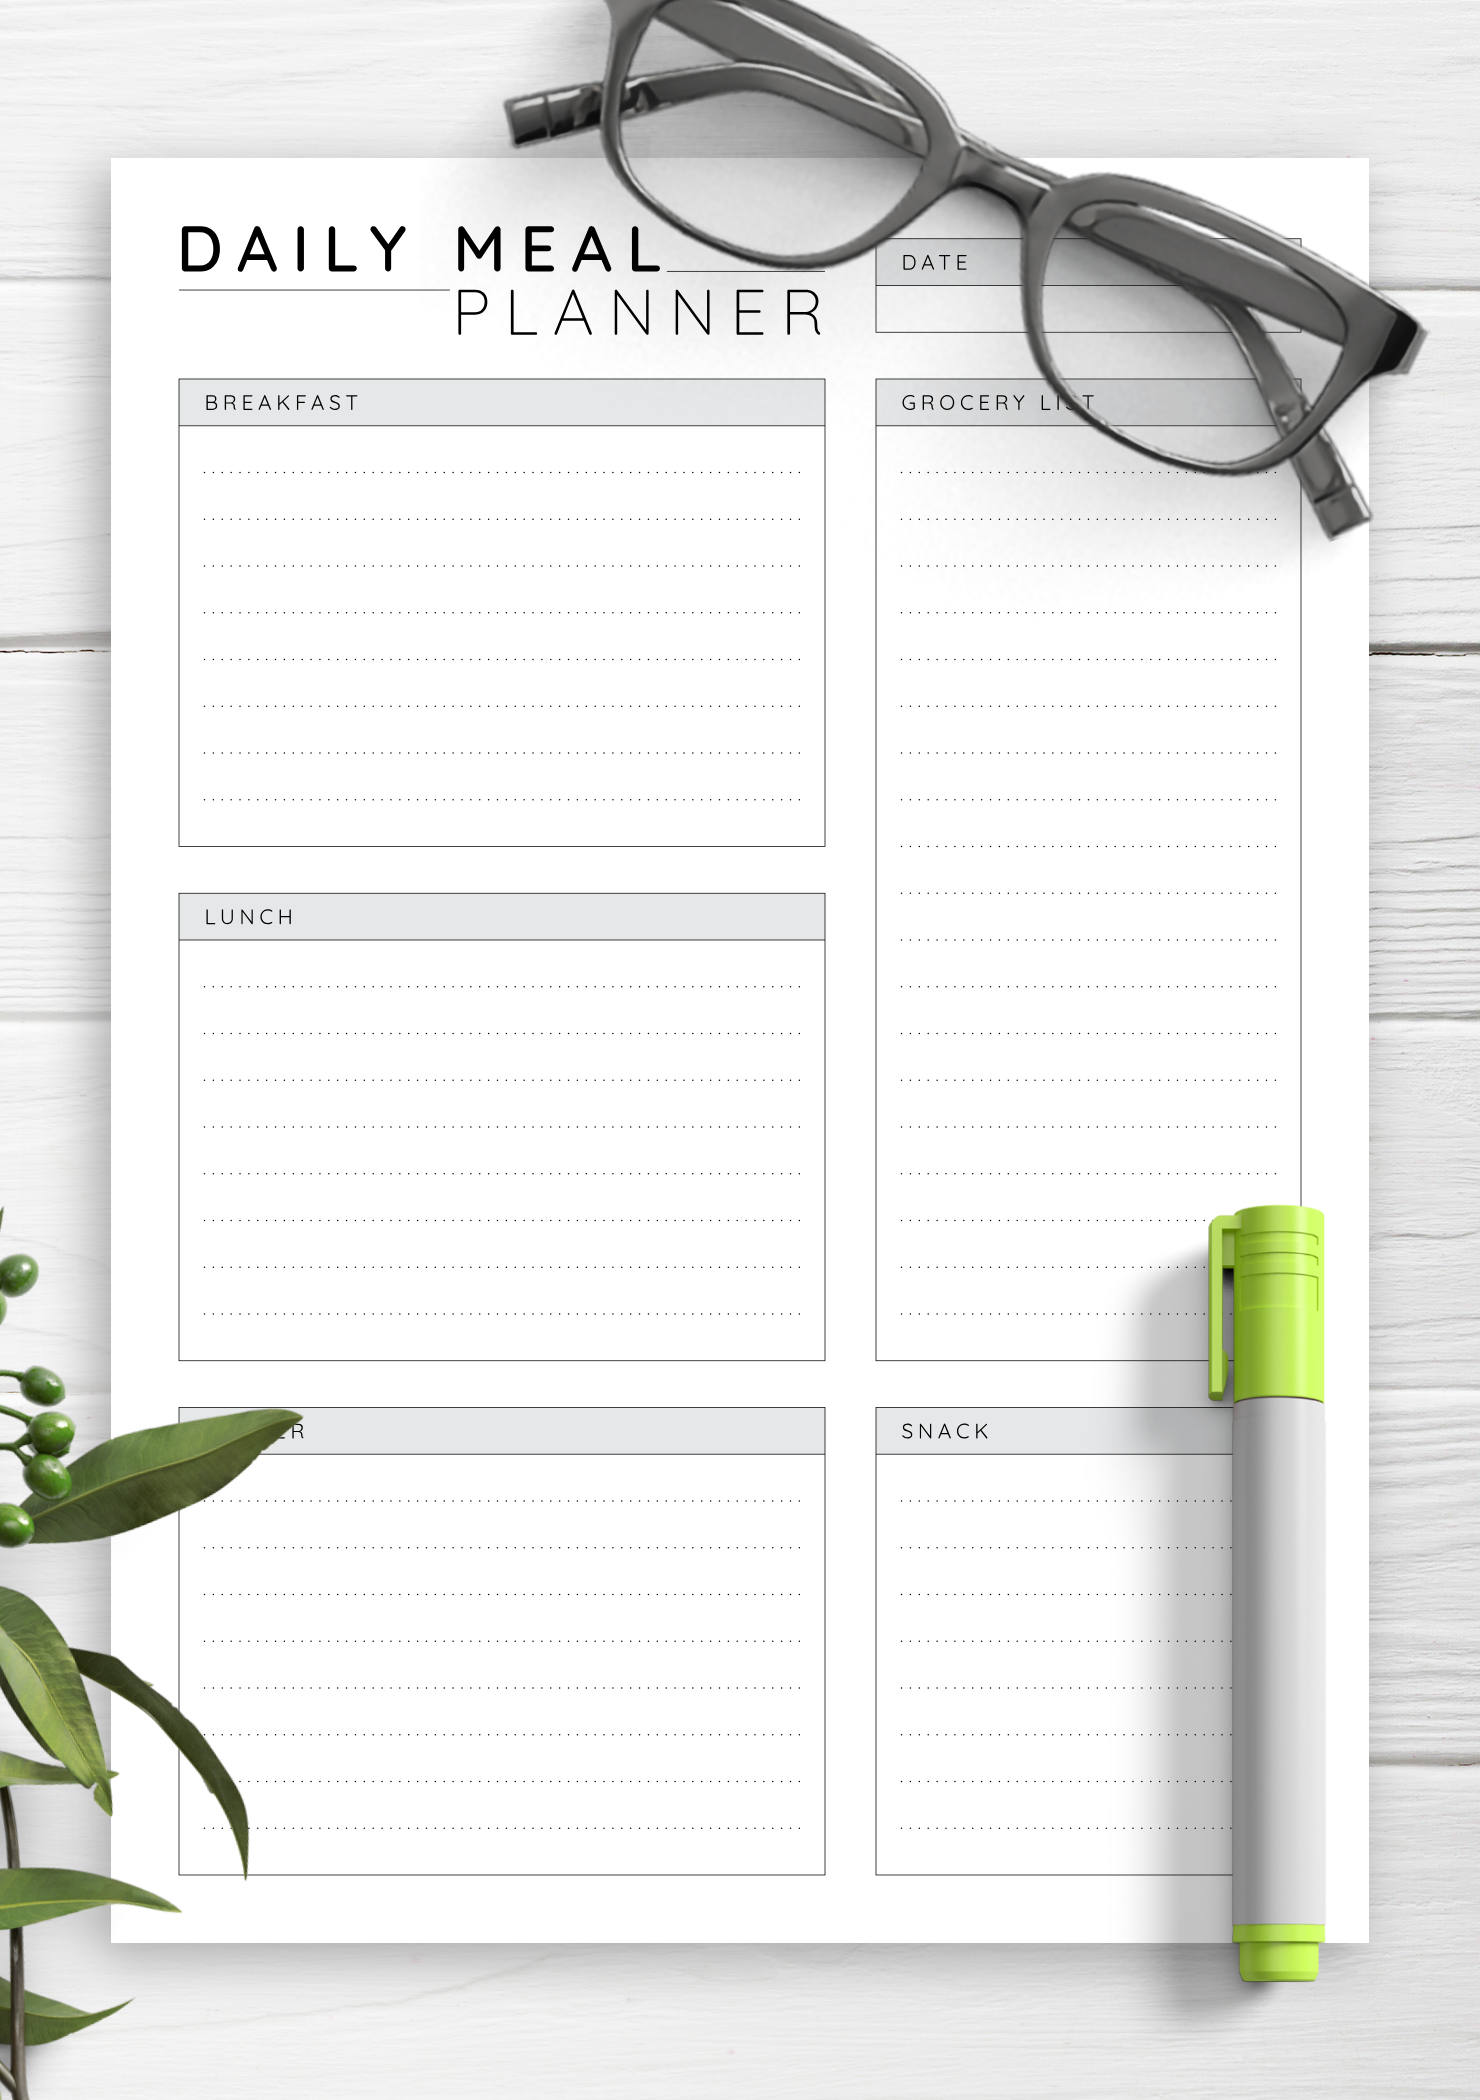 meal planner template free